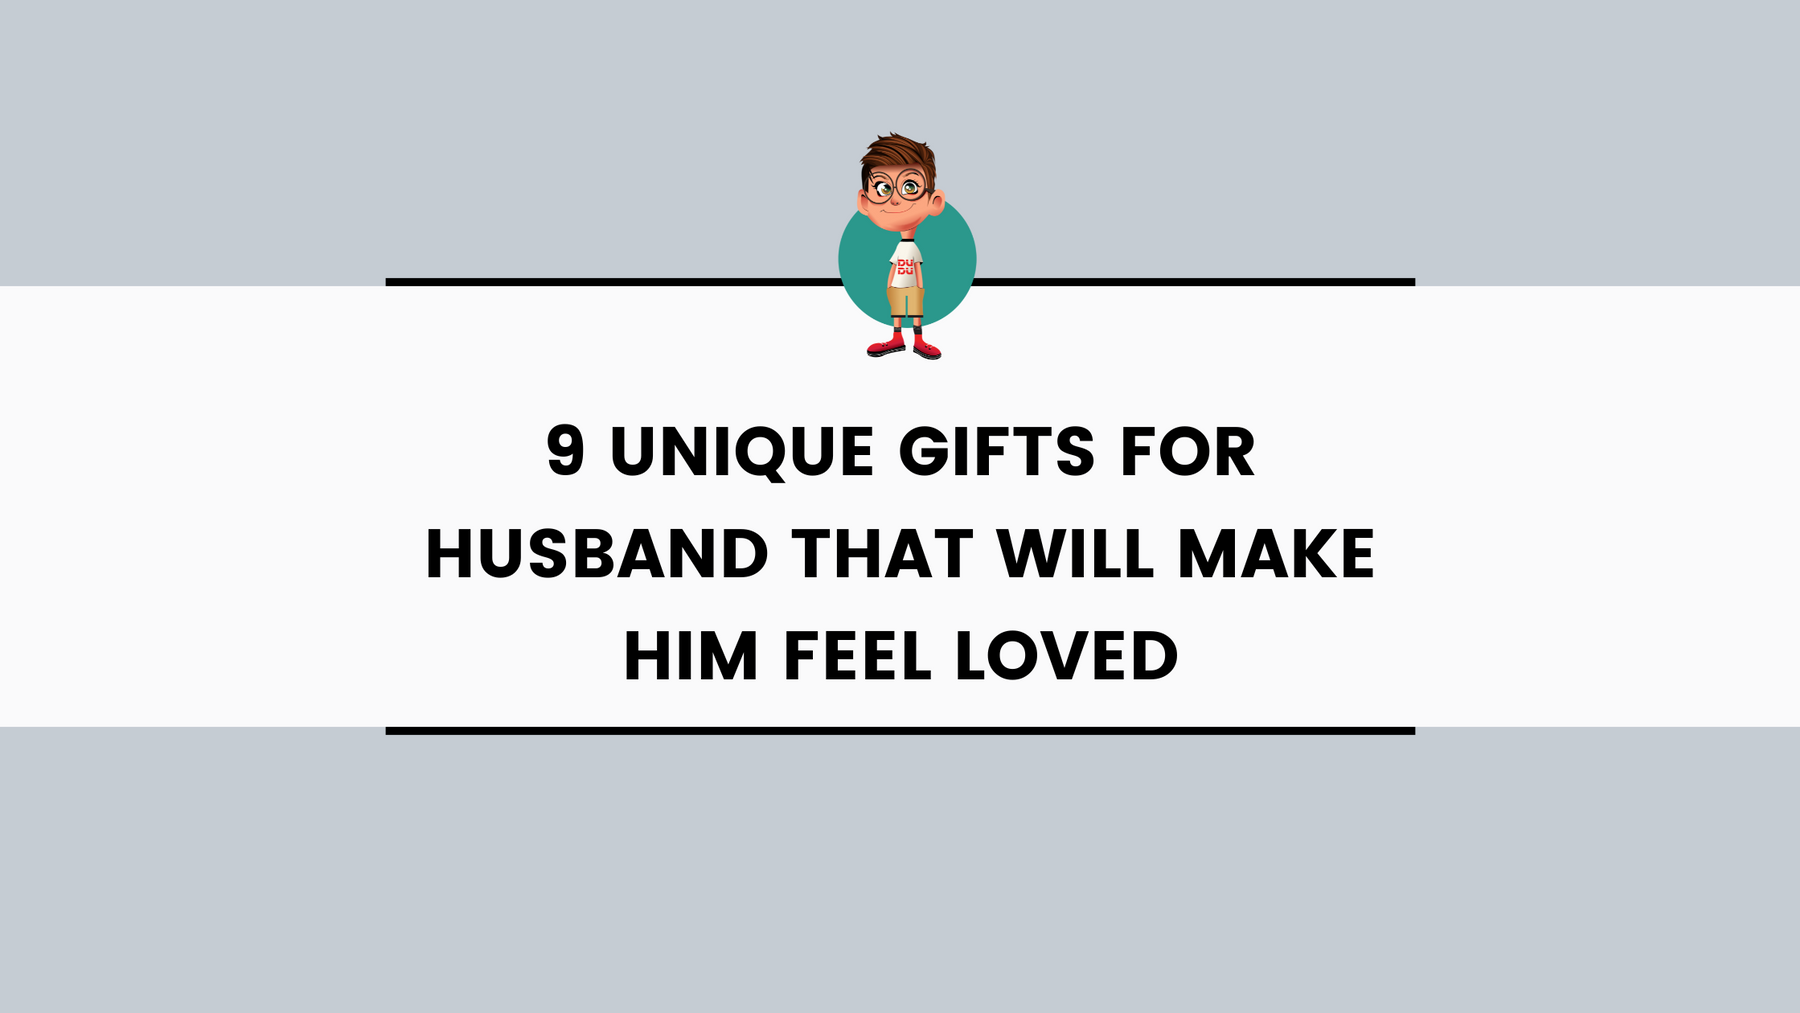 9 Unique Gifts for Husband That Will Make Him Feel Loved